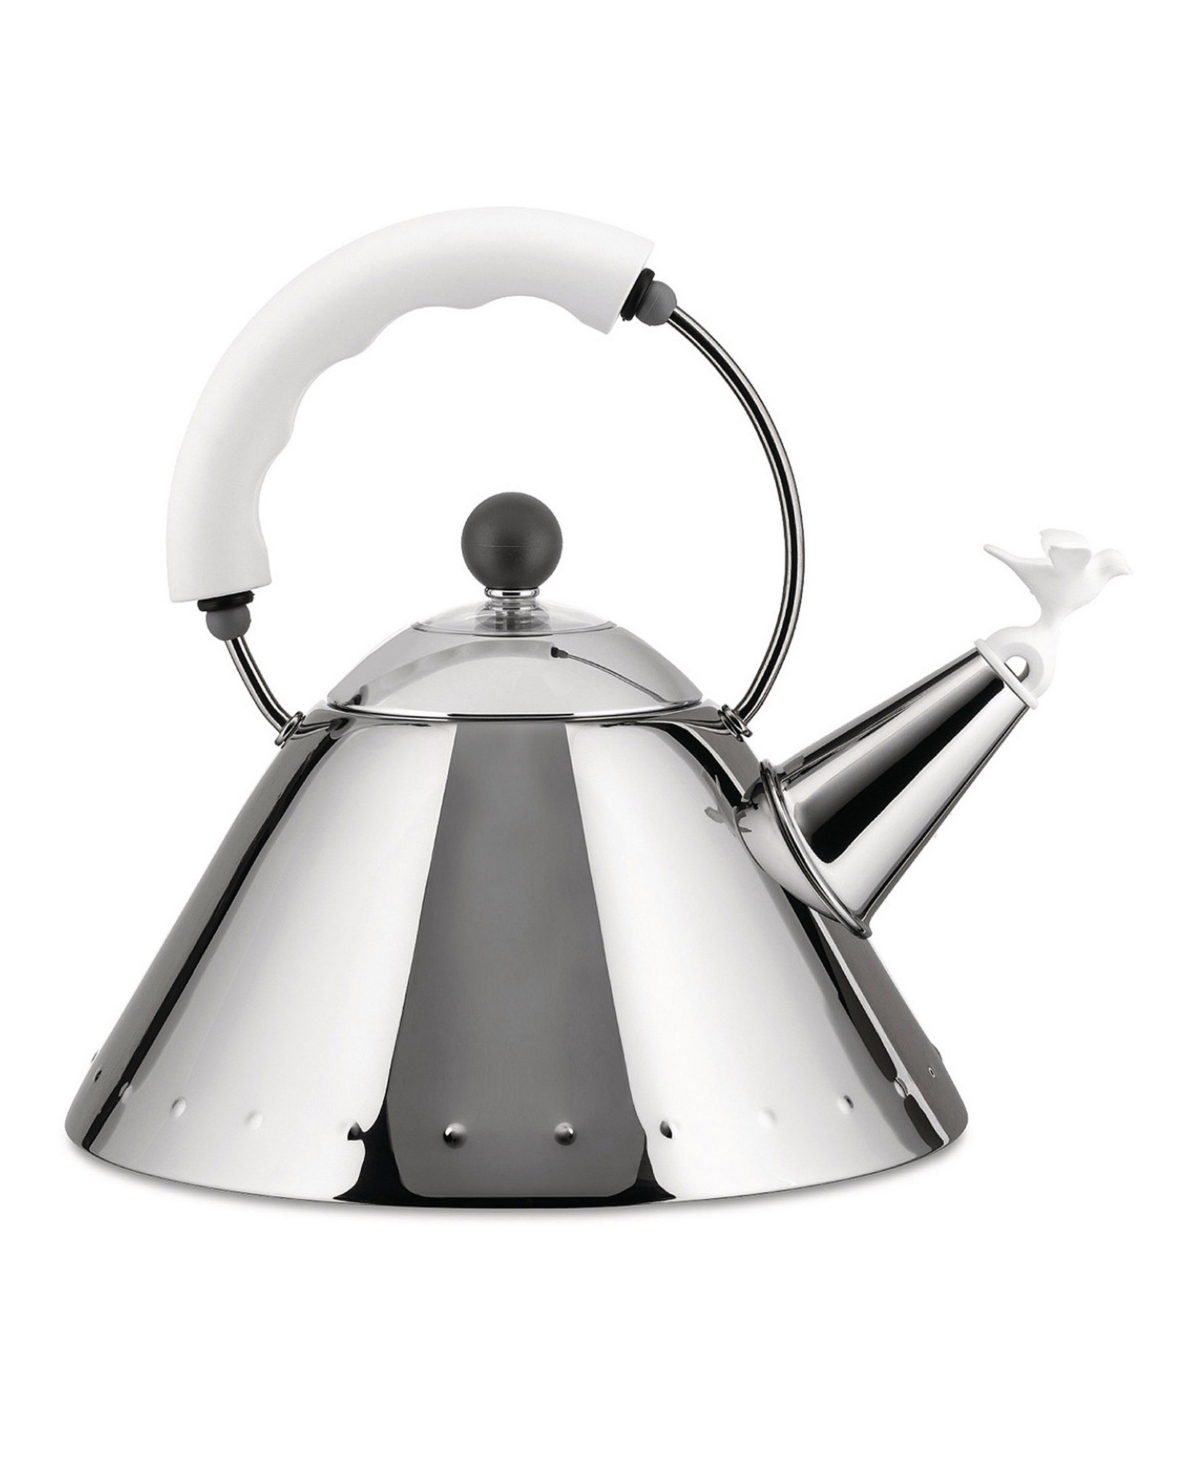 Alessi 2.1 Quart Tea Kettle By Michael Graves In Silver